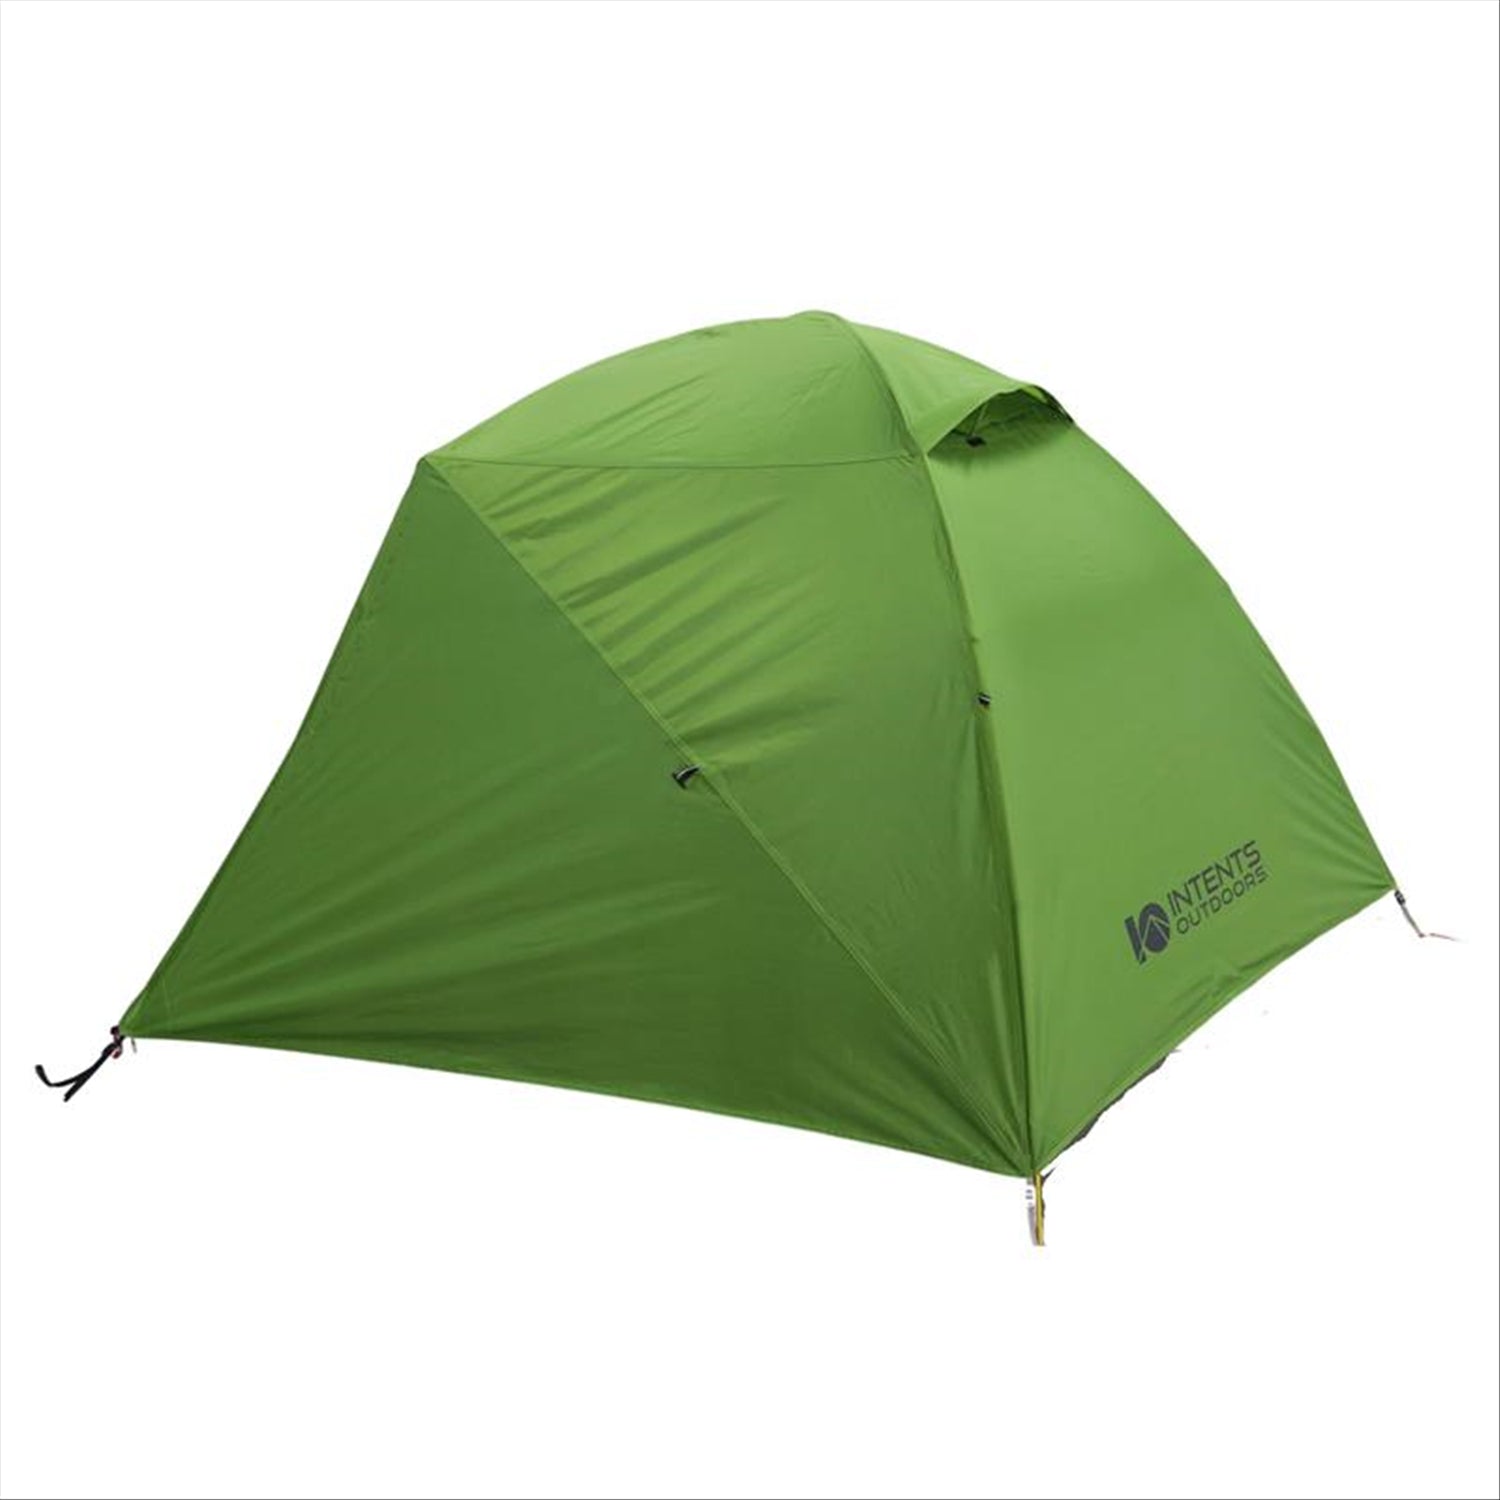 Ultralight Hiking Tent Single - Lightweight Solo Swag - 1 Person